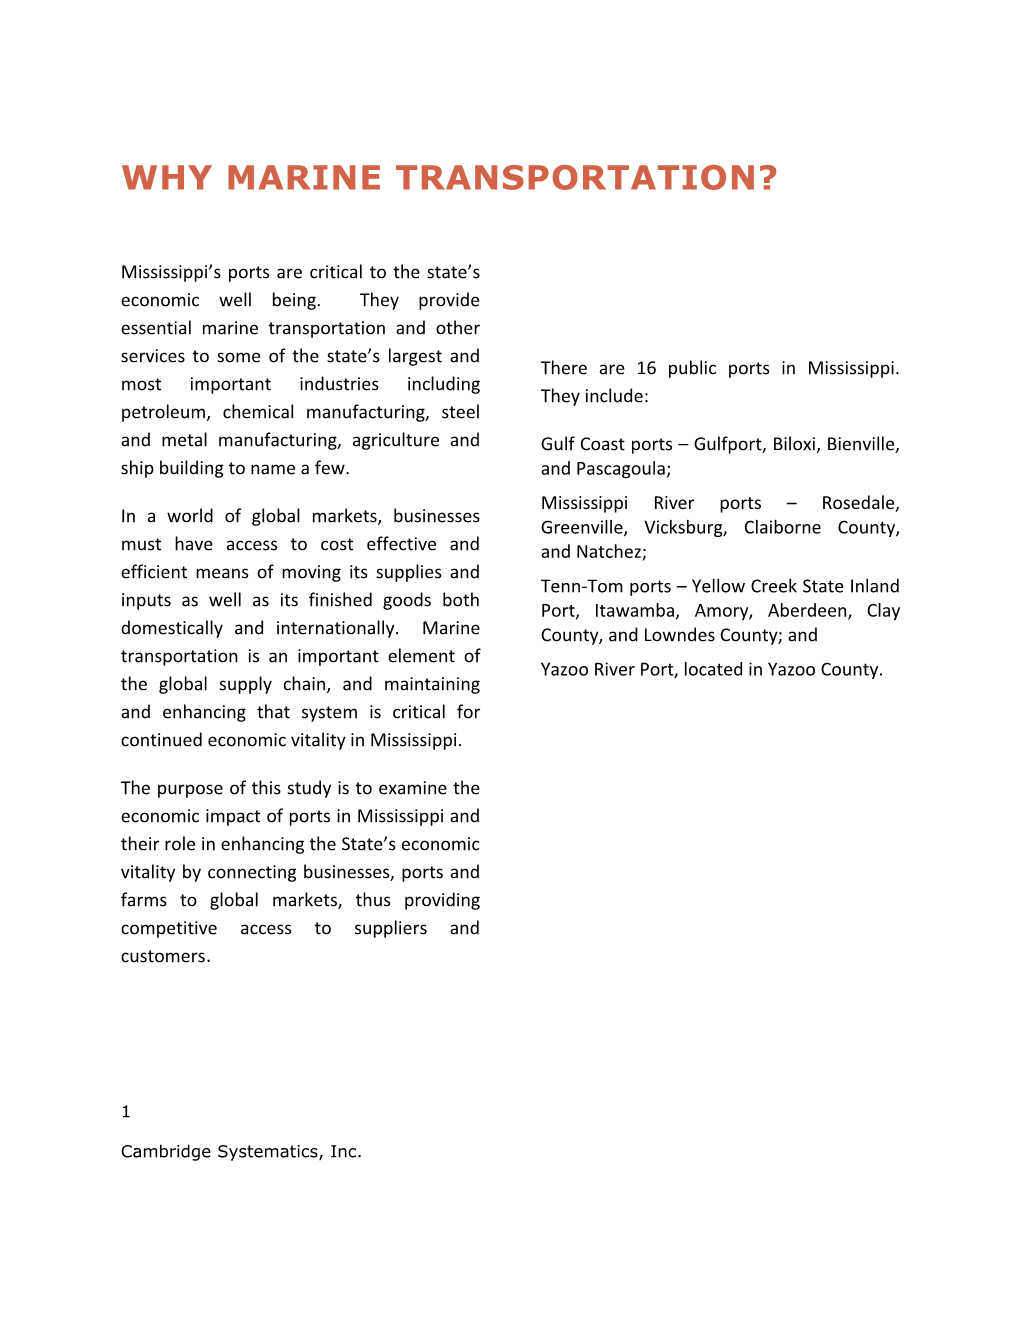 The Economic Role of Ports and Marine Transportation in Mississippi